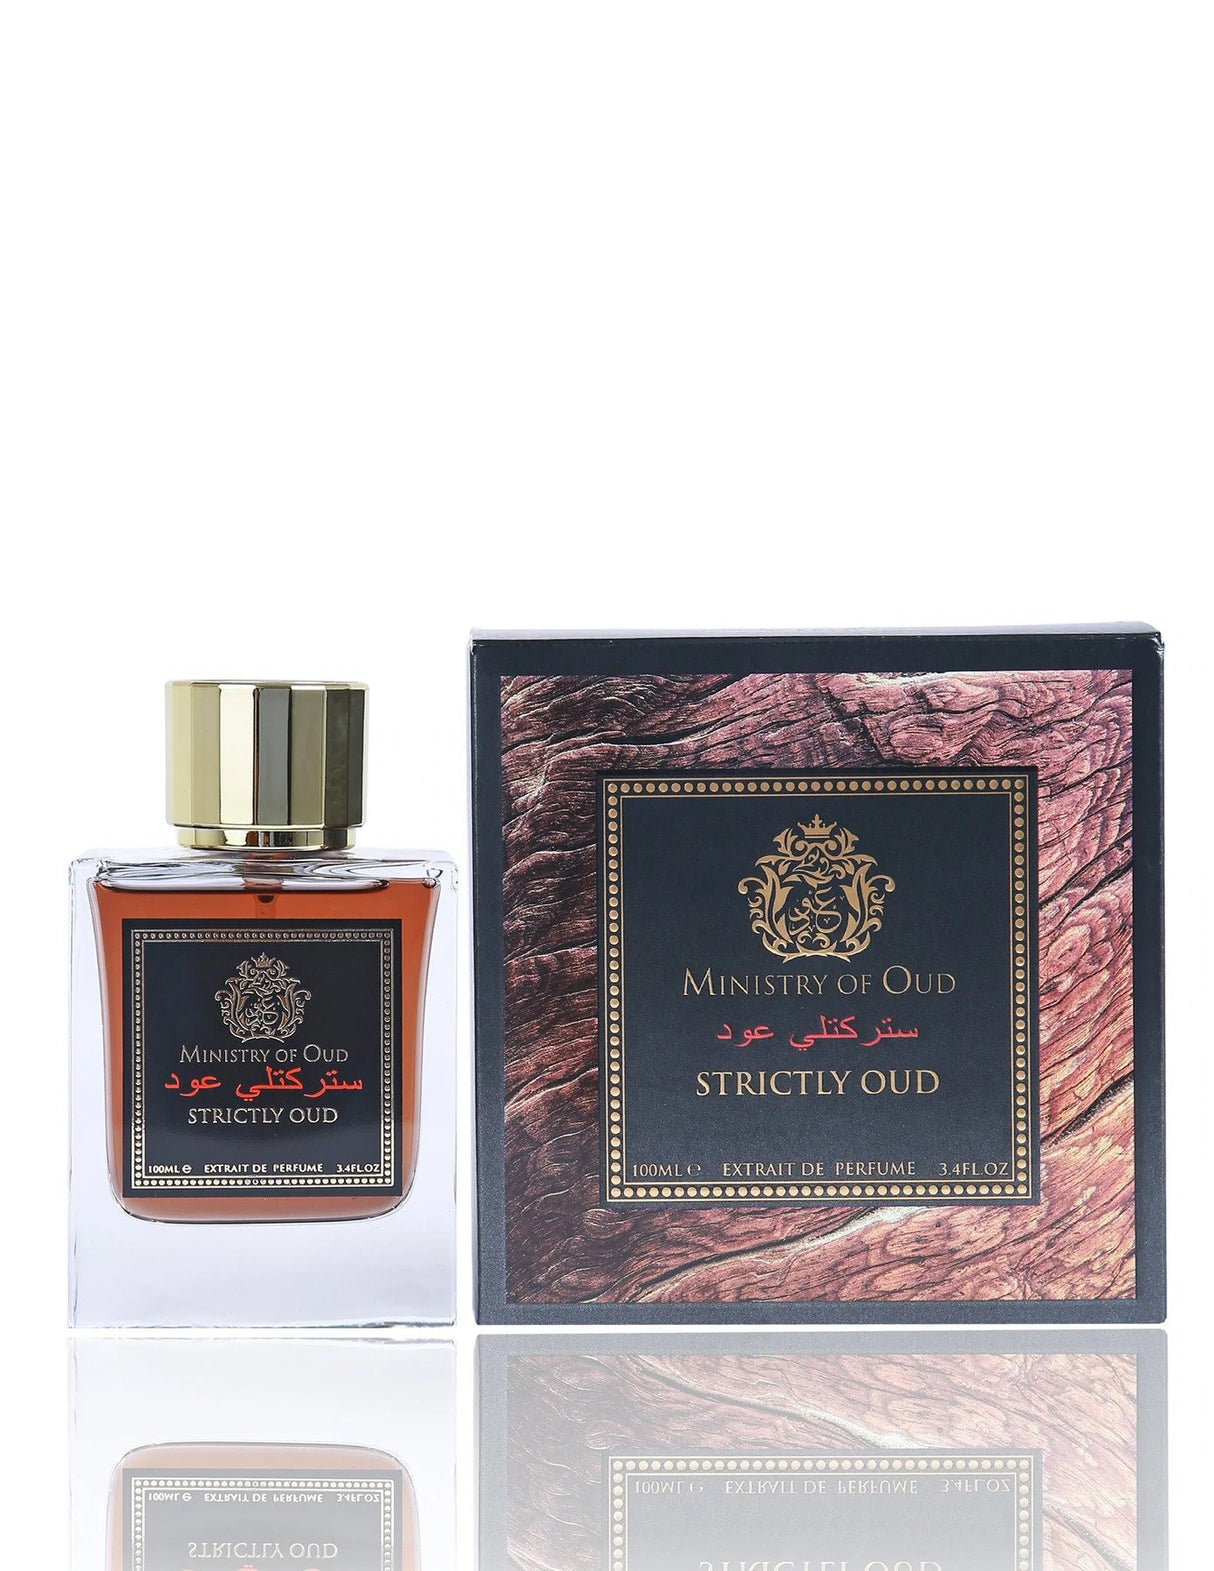 Strictly Oud - Ministry of Oud Range